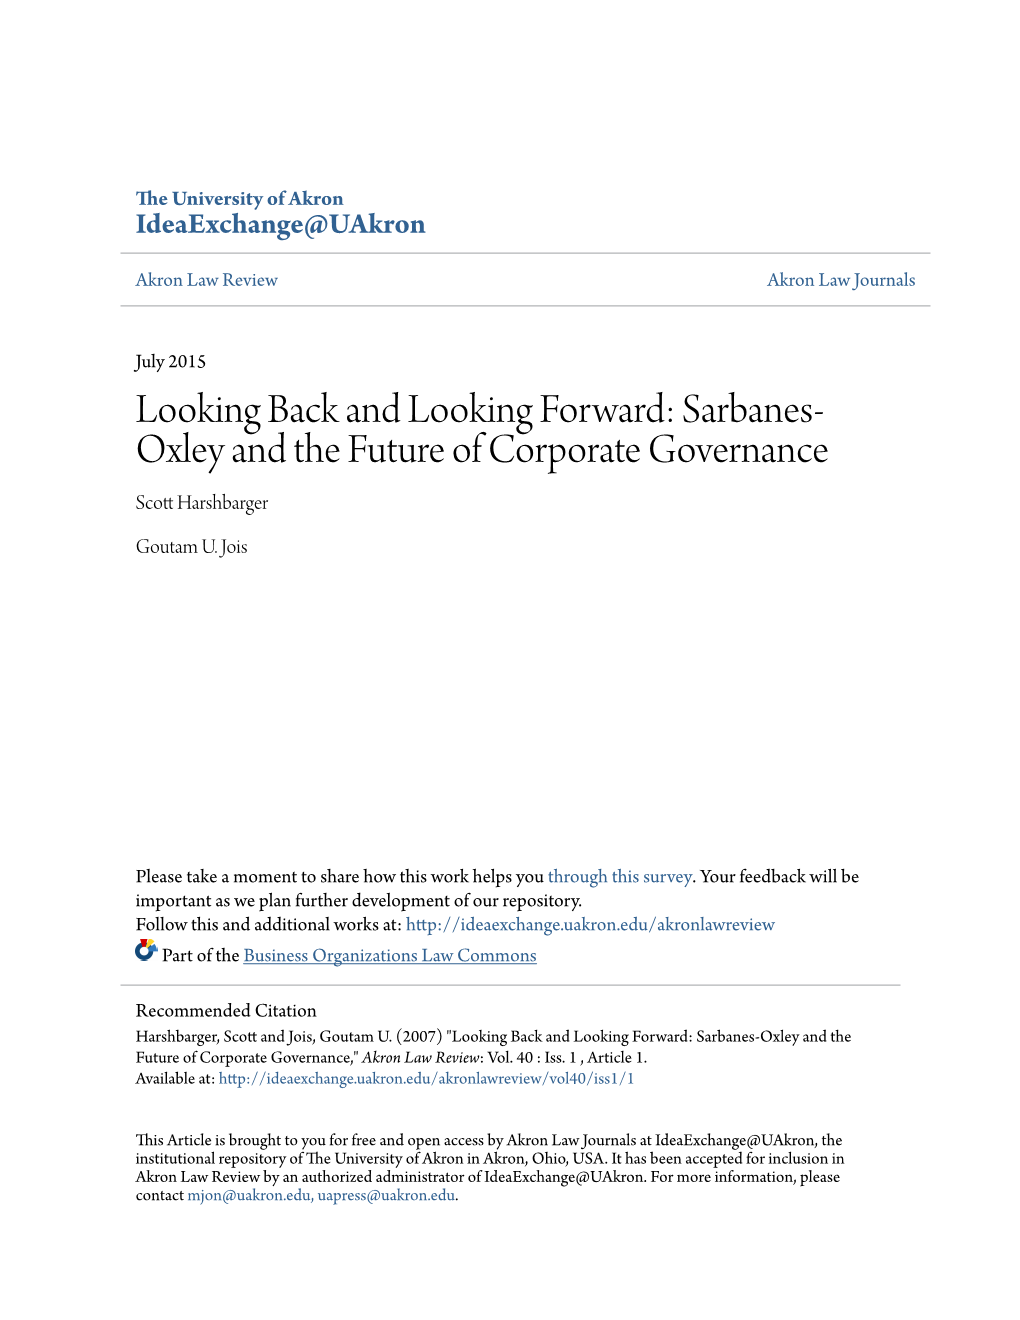 Sarbanes-Oxley and the Future of Corporate Governance," Akron Law Review: Vol